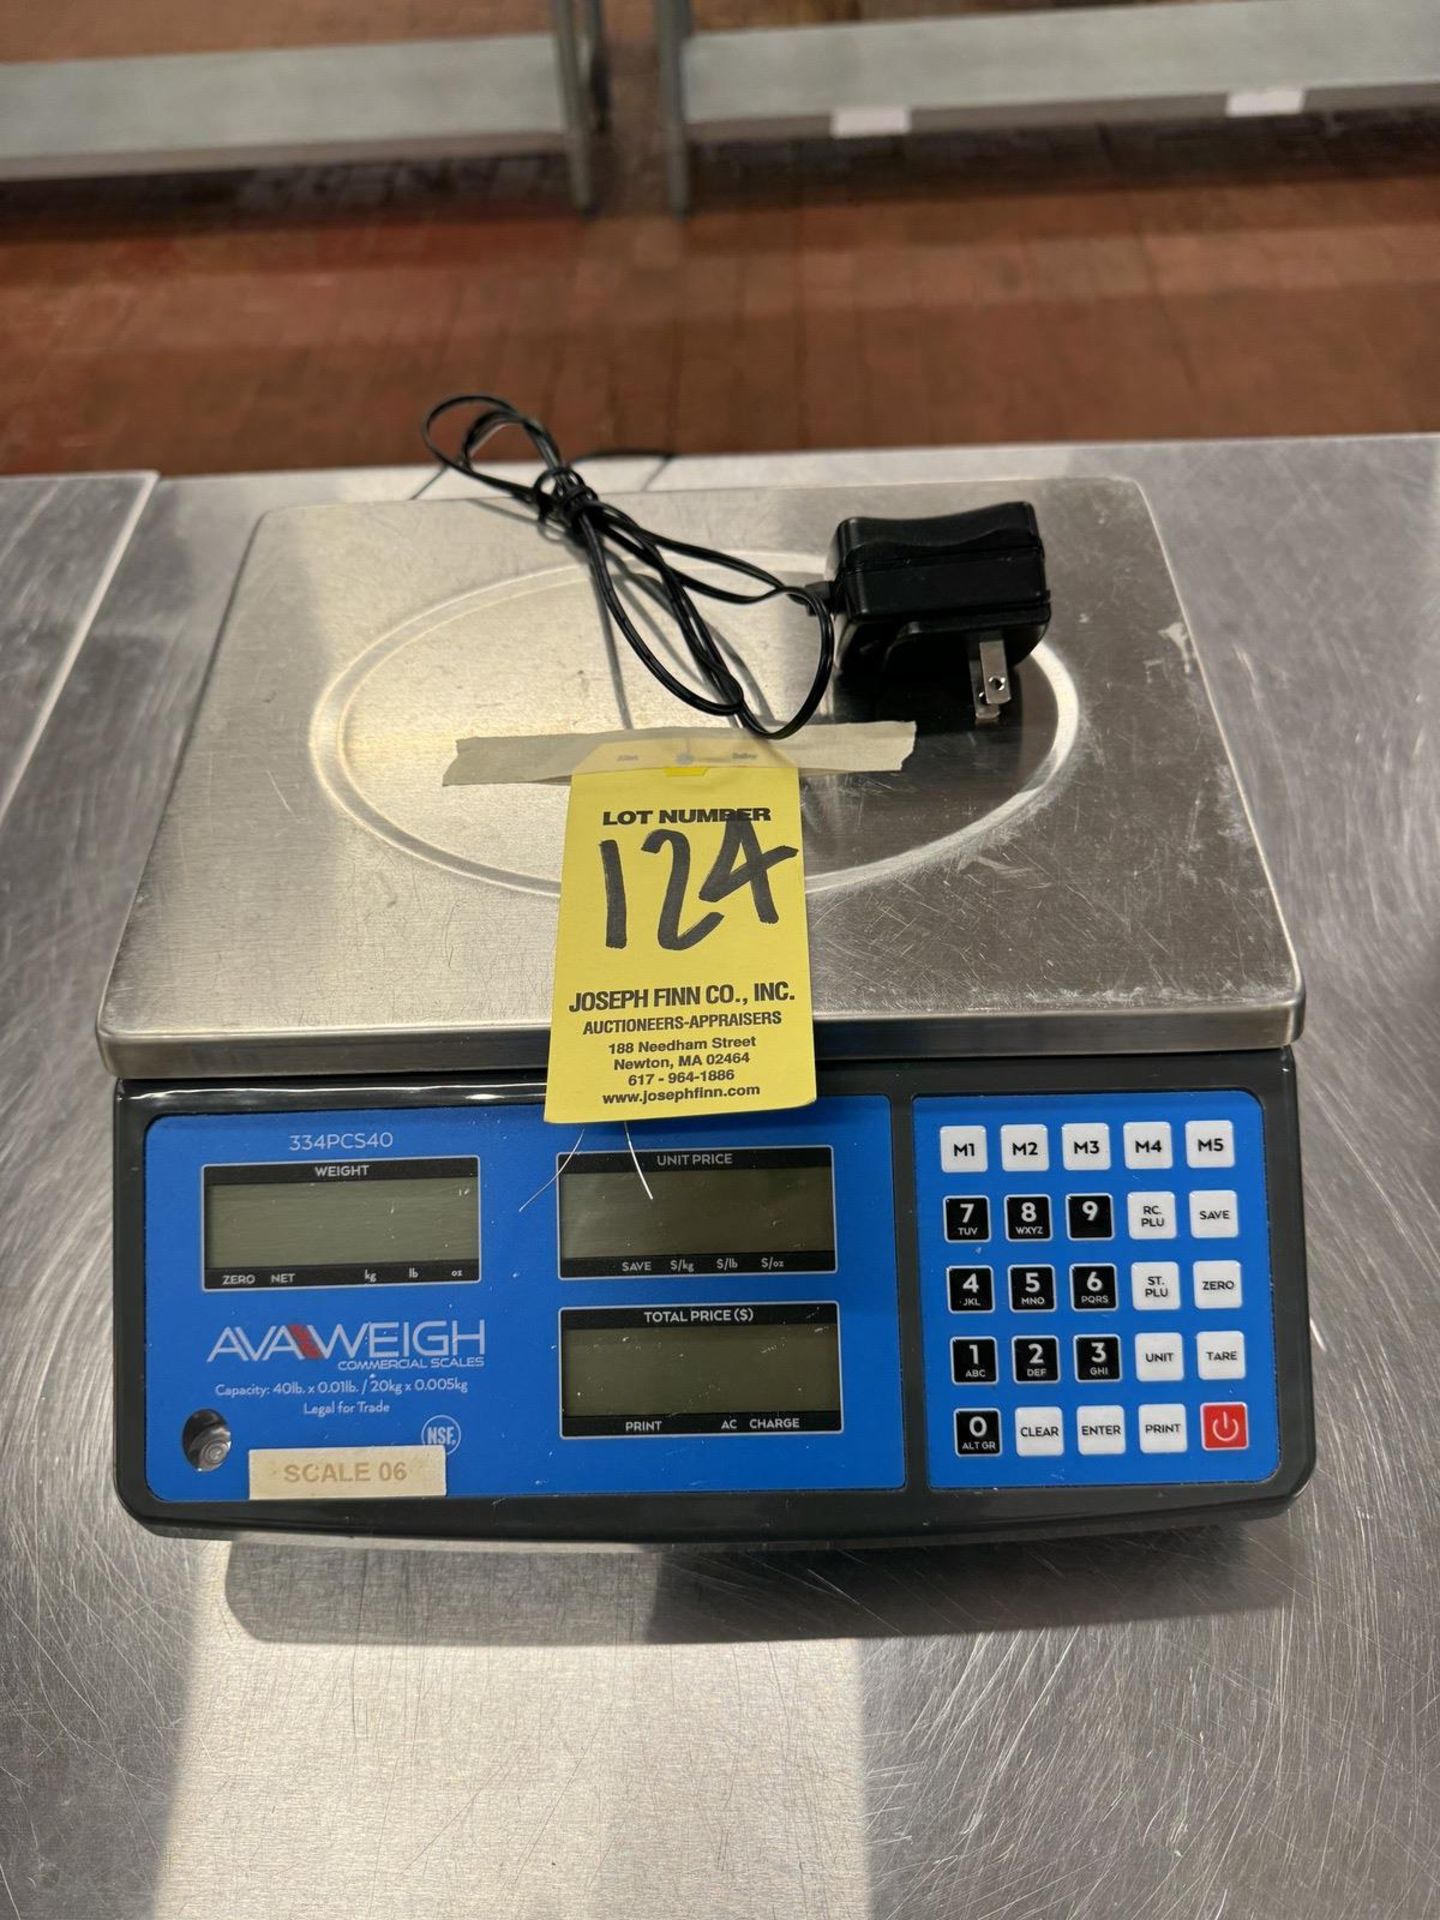 Avaweigh 334PCS40 Commercial Digital Scale, 40 Lb. Capacity